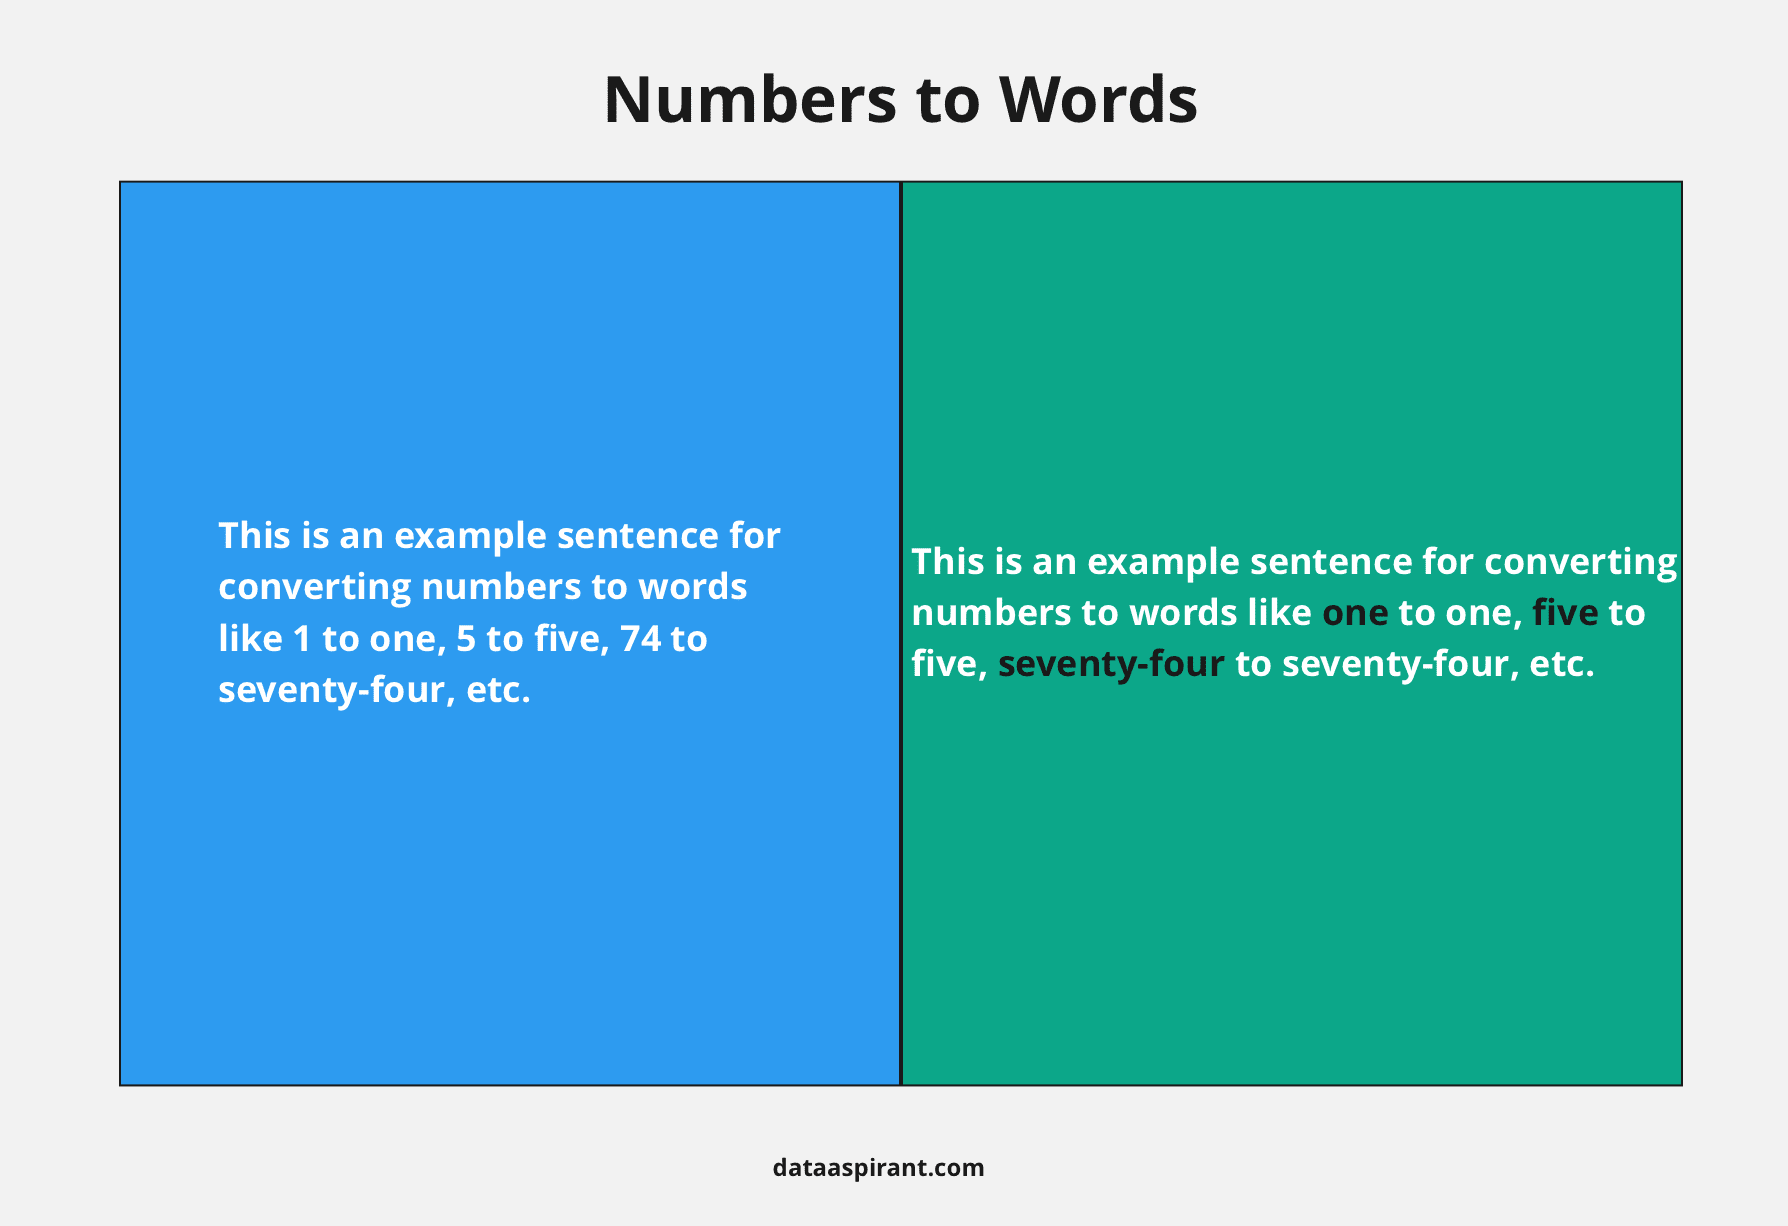 Converting Numbers to Words